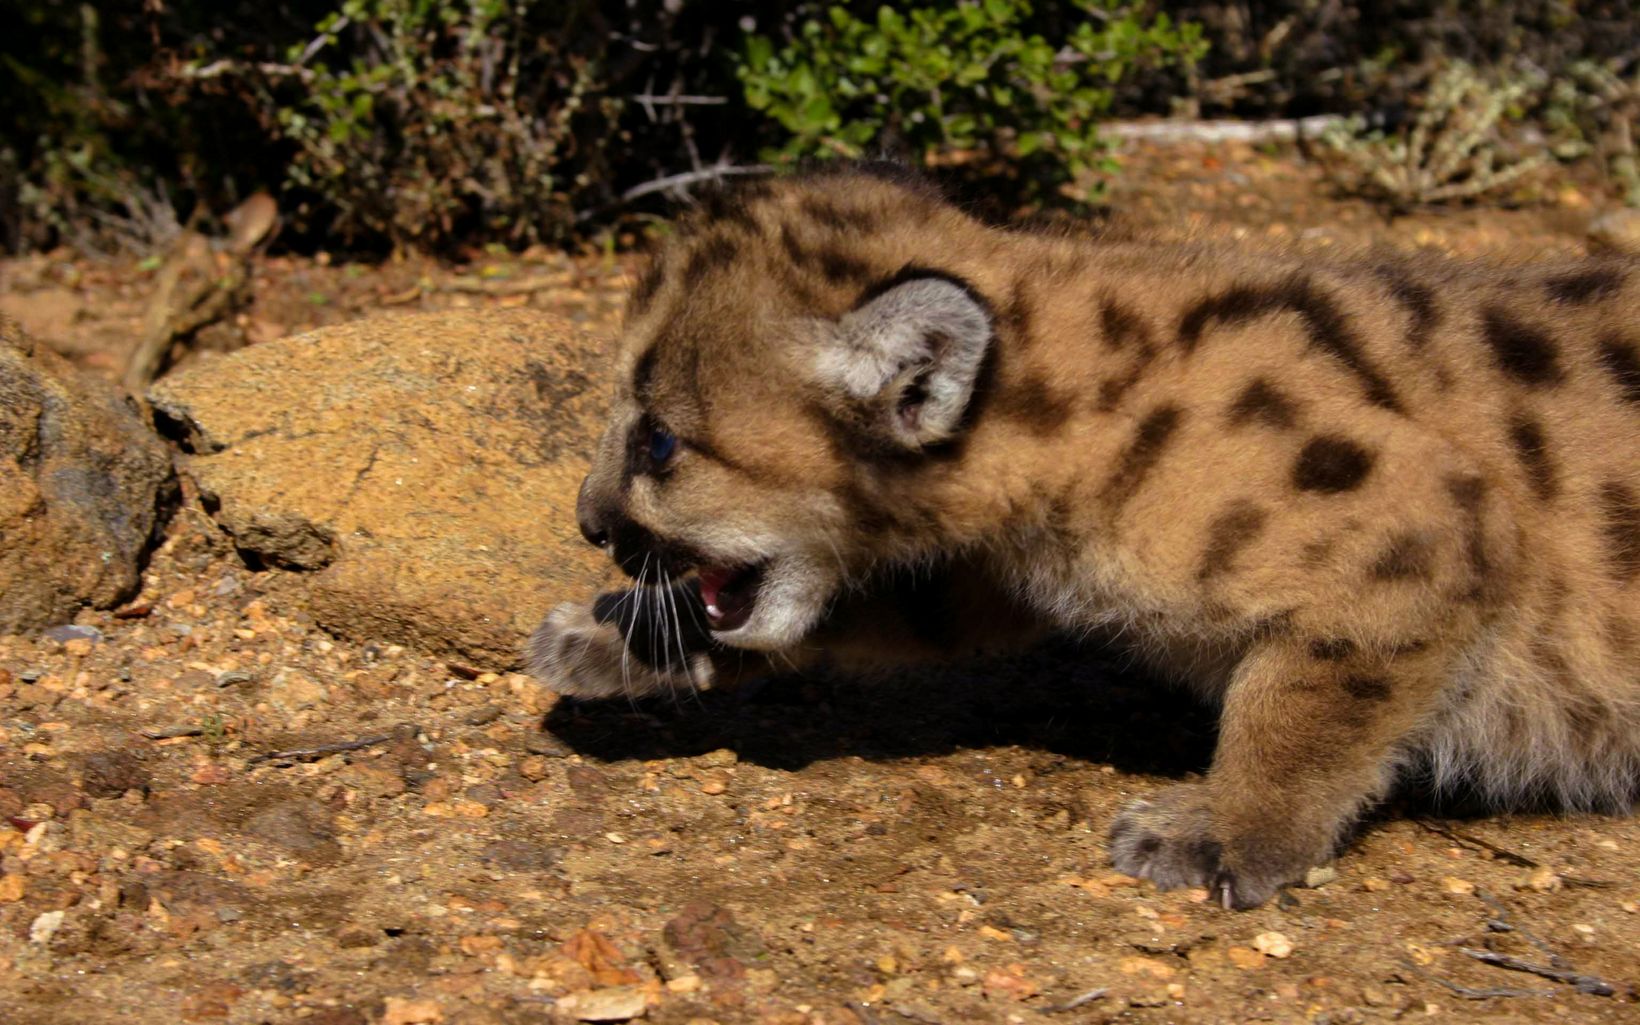 A young mountain lion takes its first steps